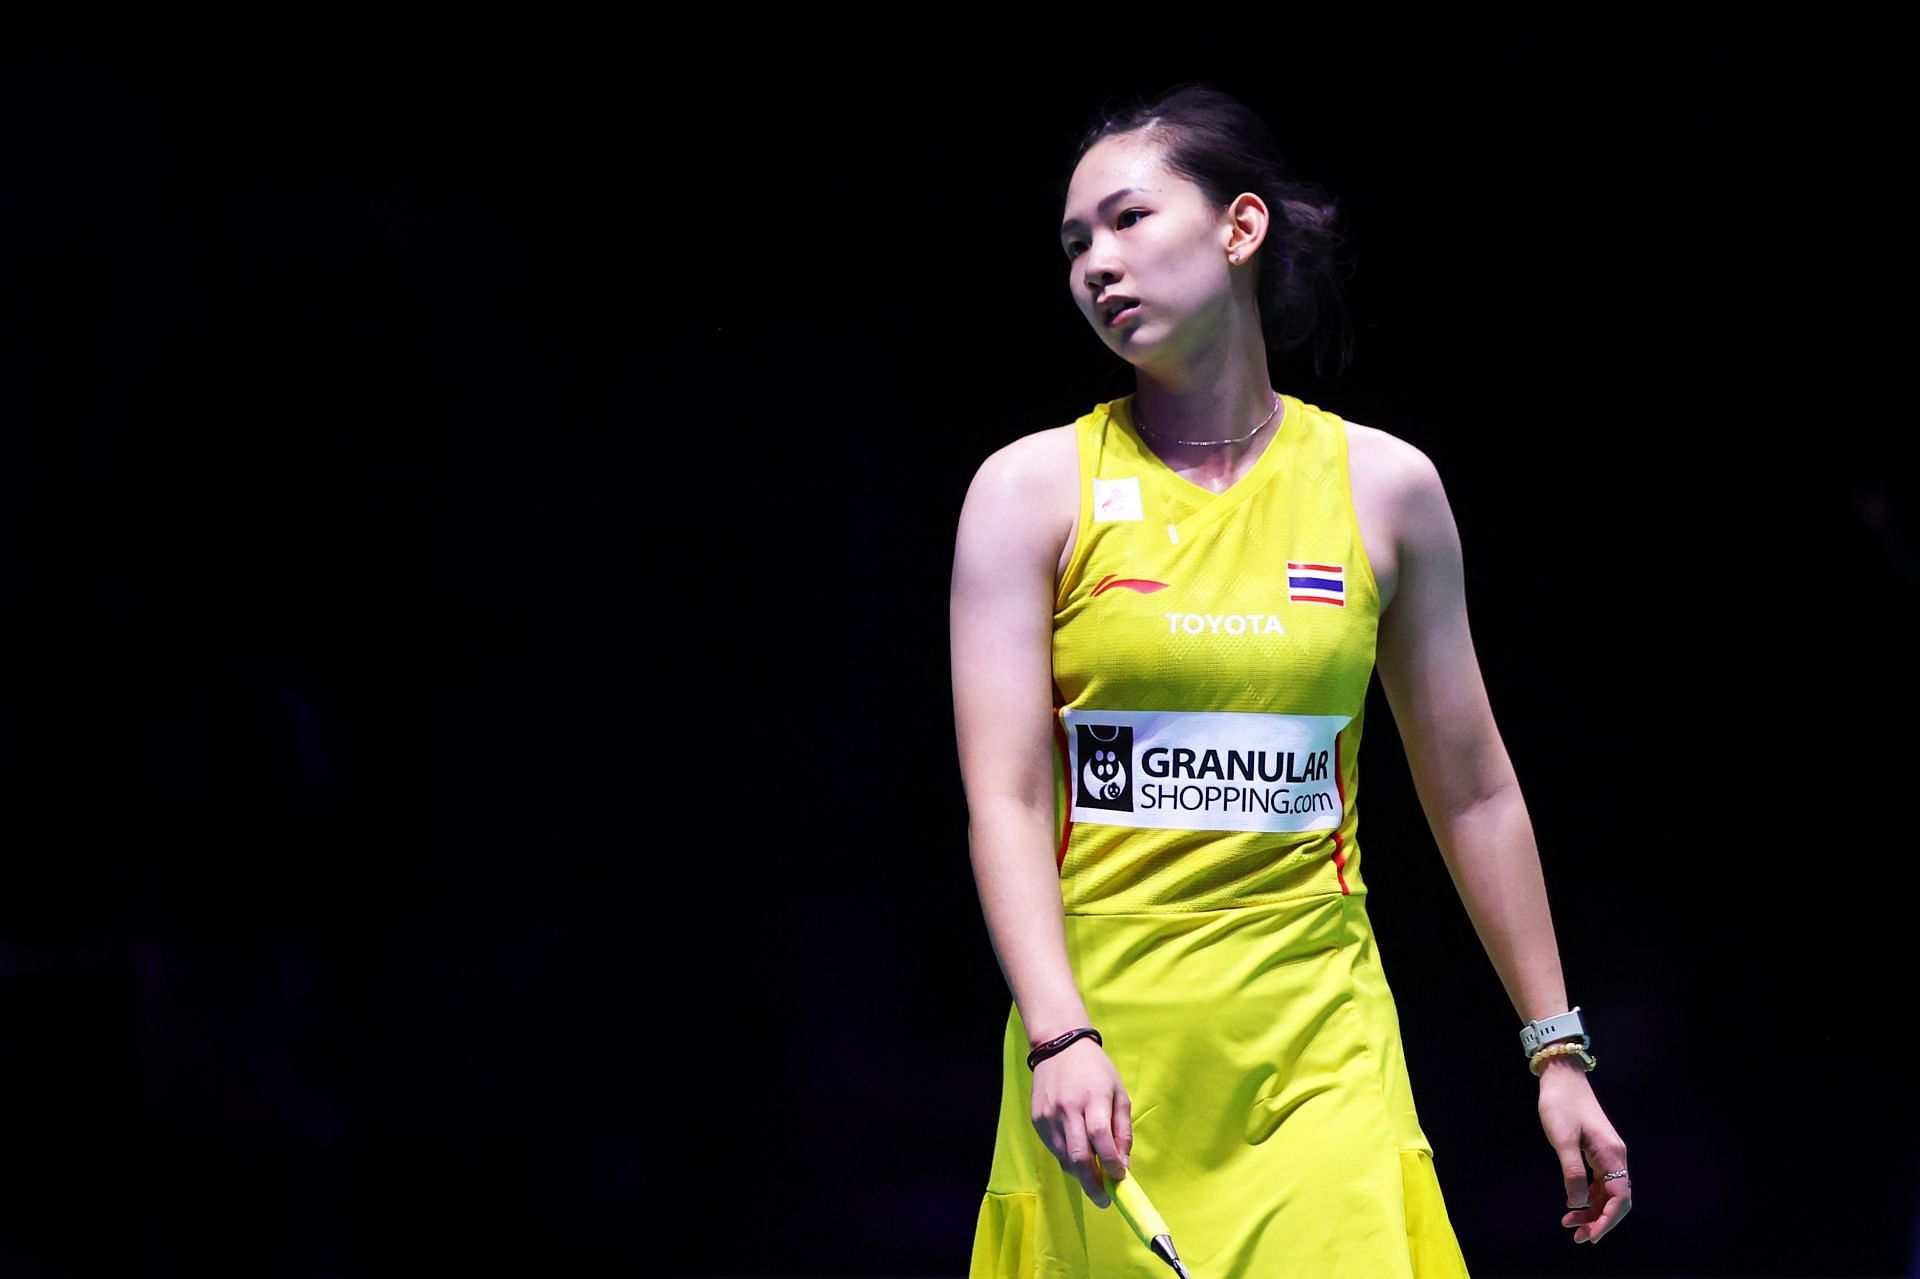 Pornpawee Chochuwong in action at the YONEX All England Open Badminton Championships